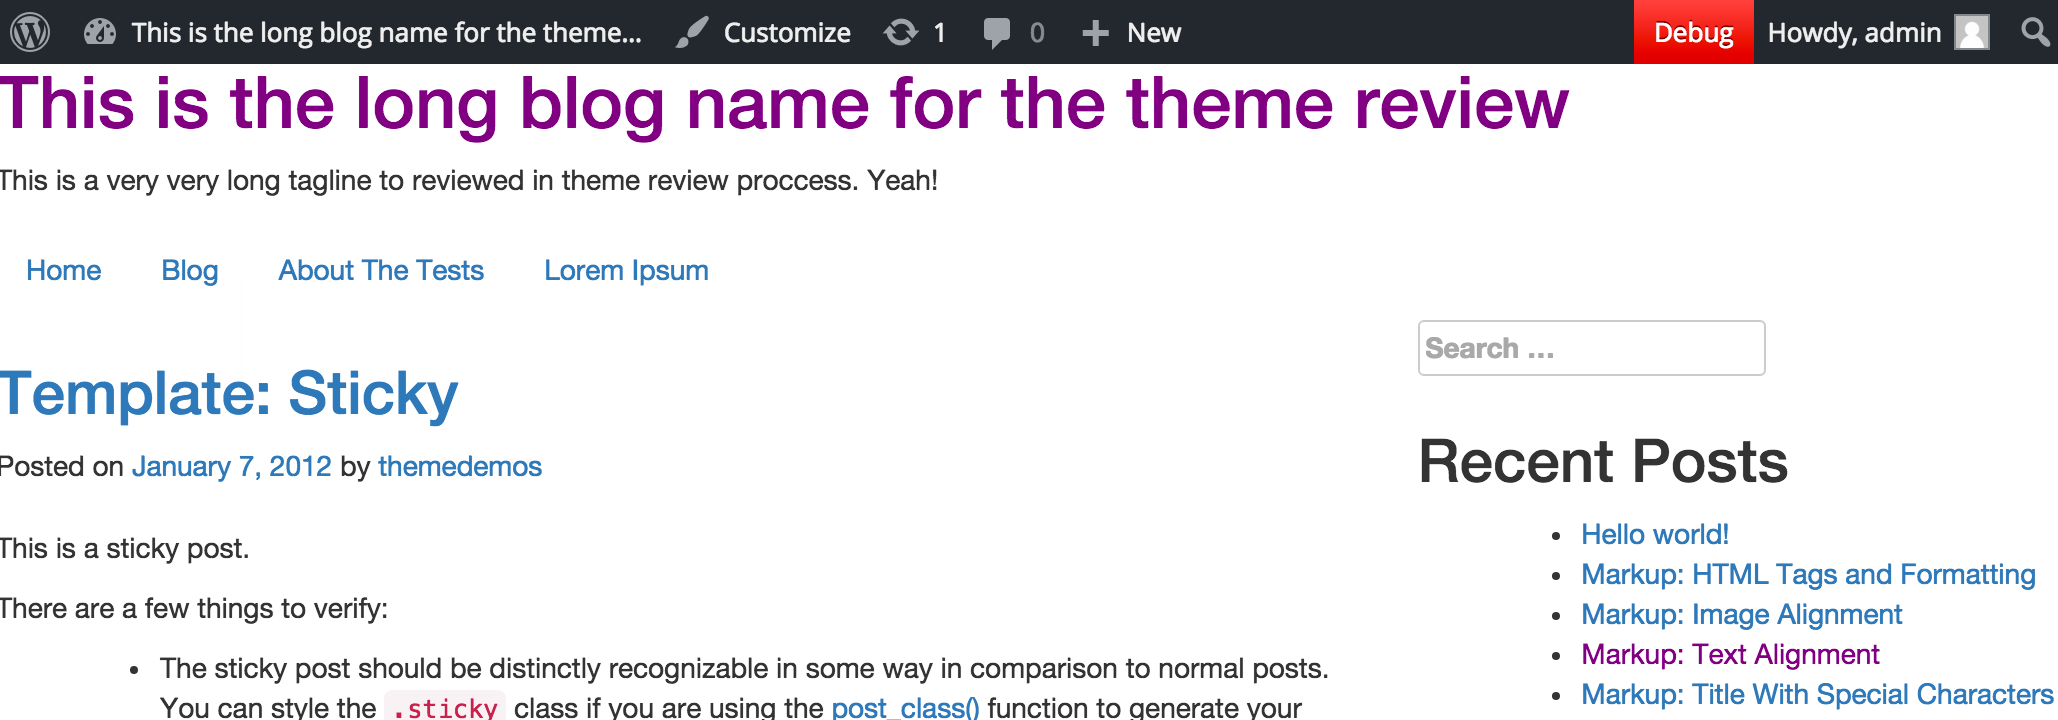 This_is_the_long_blog_name_for_the_theme_review___This_is_a_very_very_long_tagline_to_reviewed_in_theme_review_proccess__Yeah_.png